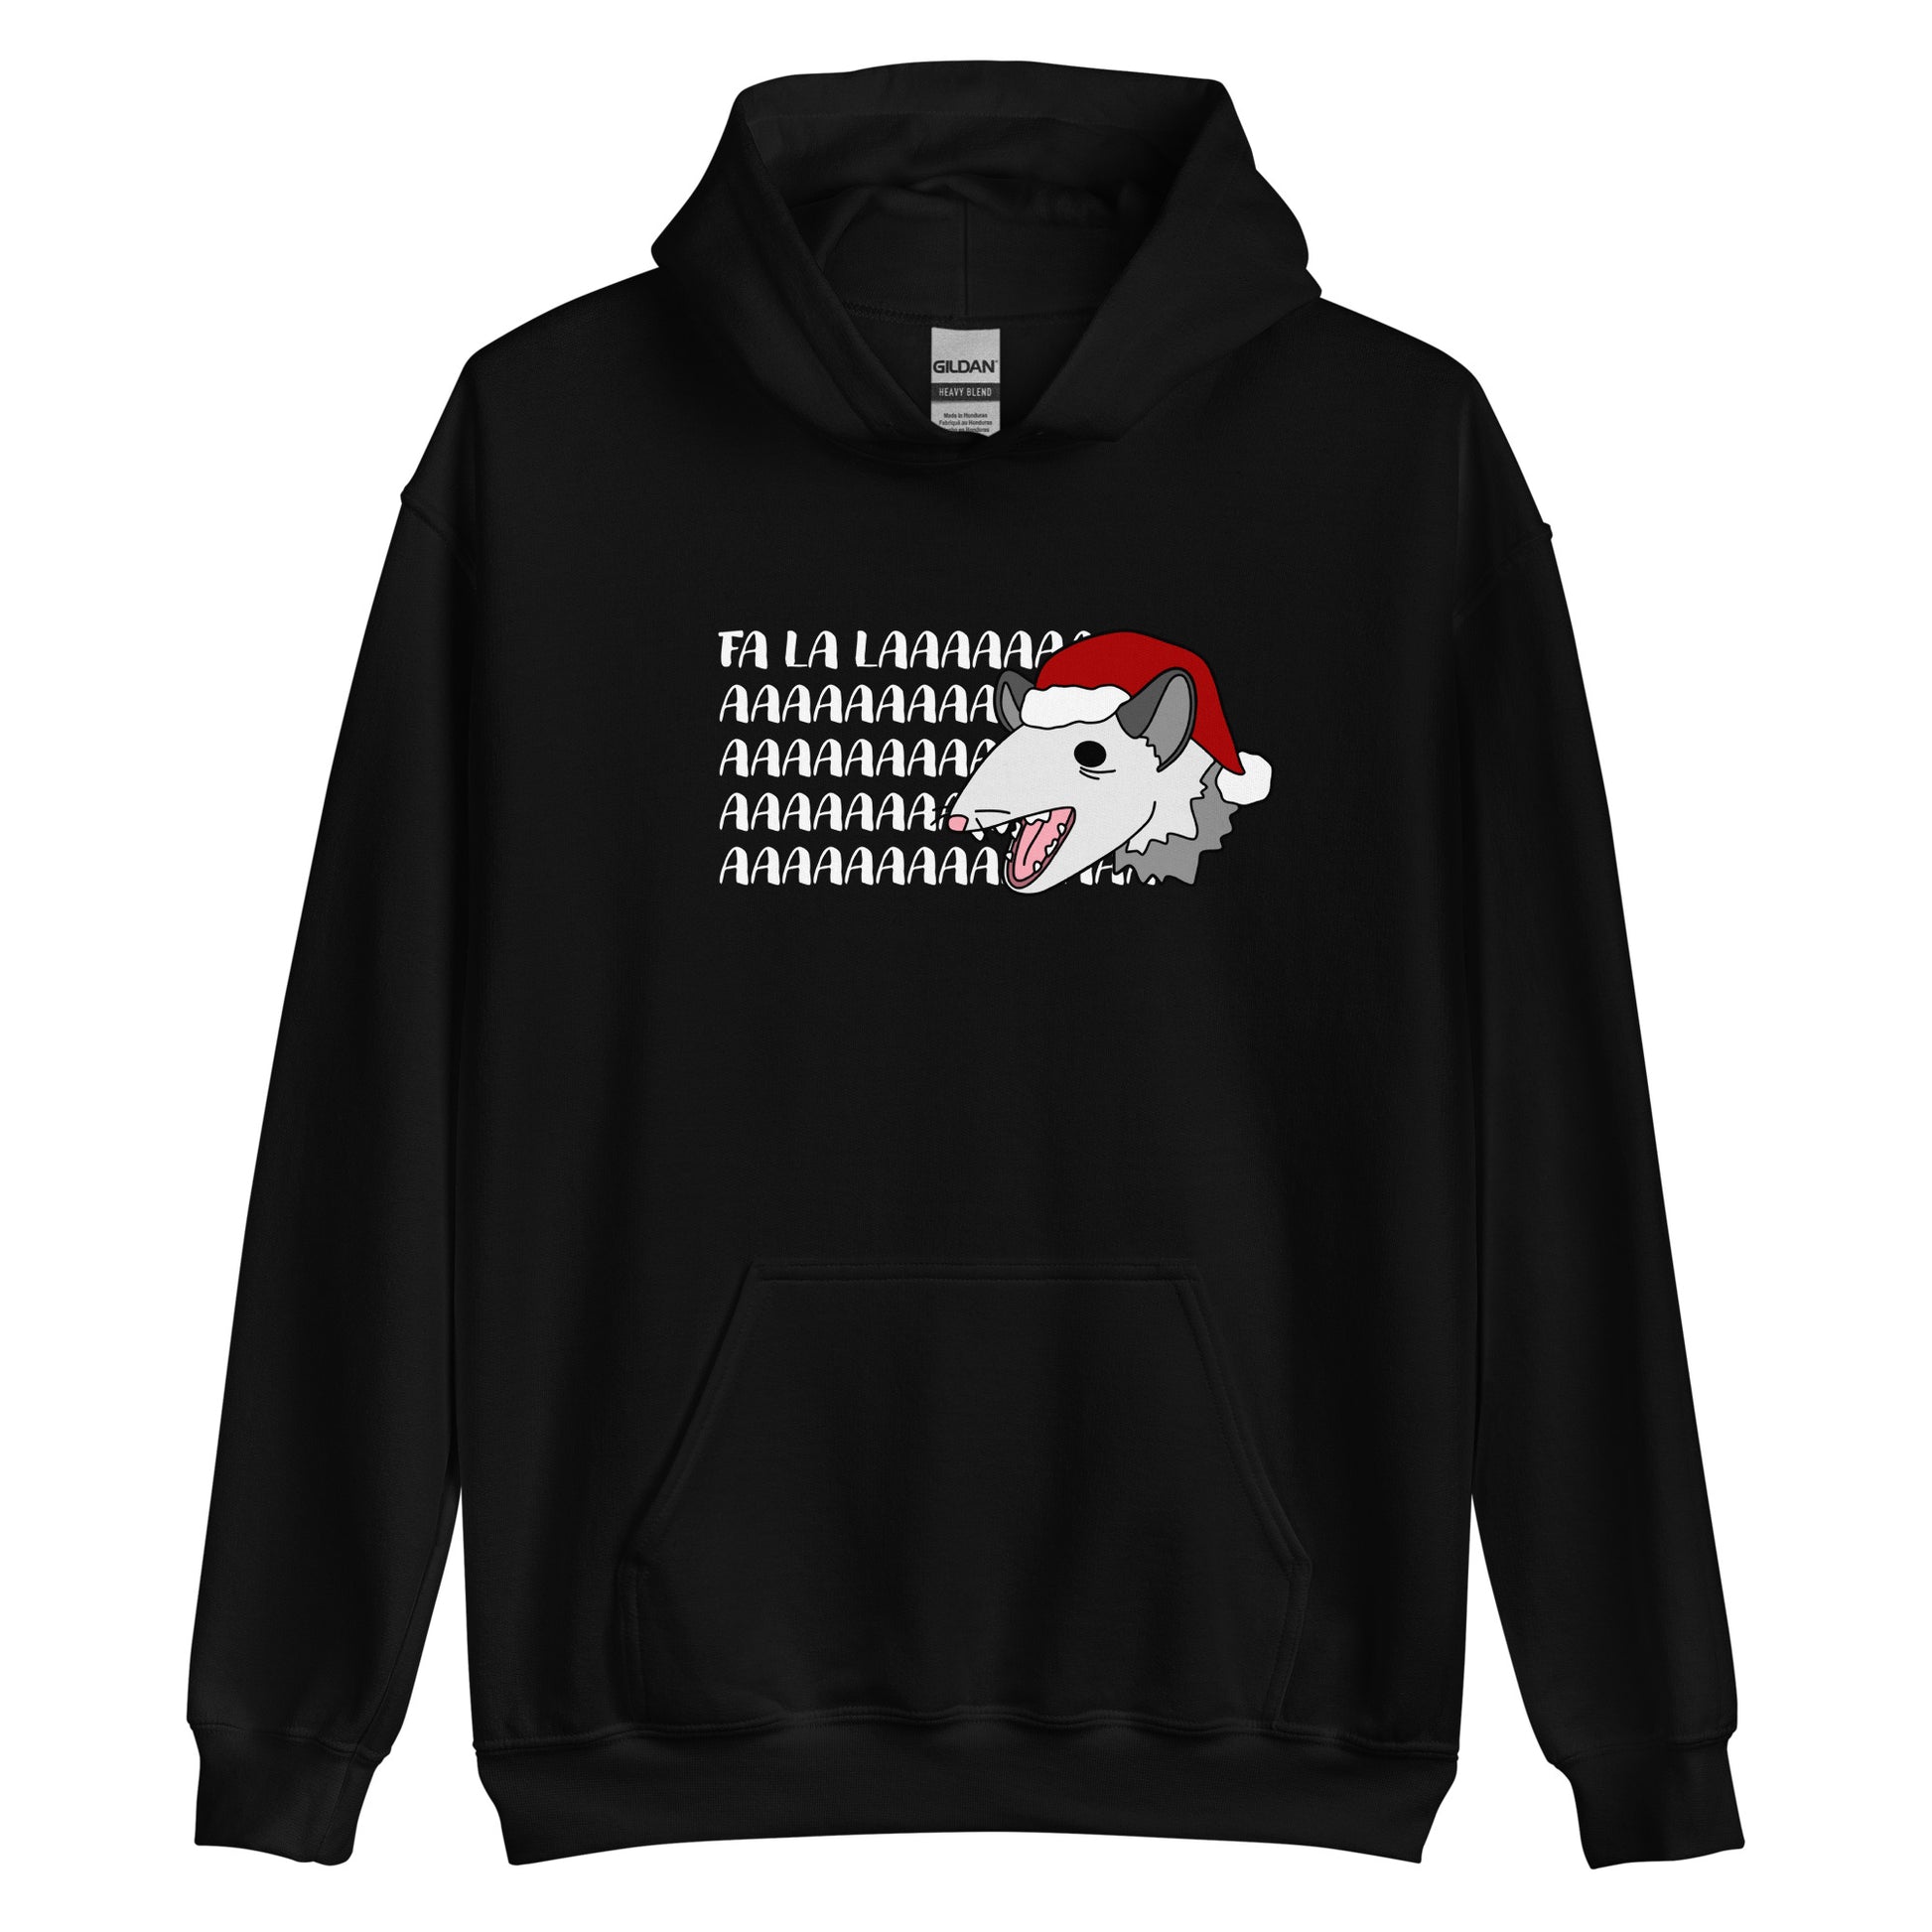 A black hooded sweatshirt featuring an illustration of a possum wearing a Santa hat. The possum appears to be screaming, and text behind his head reads "FA LA LAAAAAA"